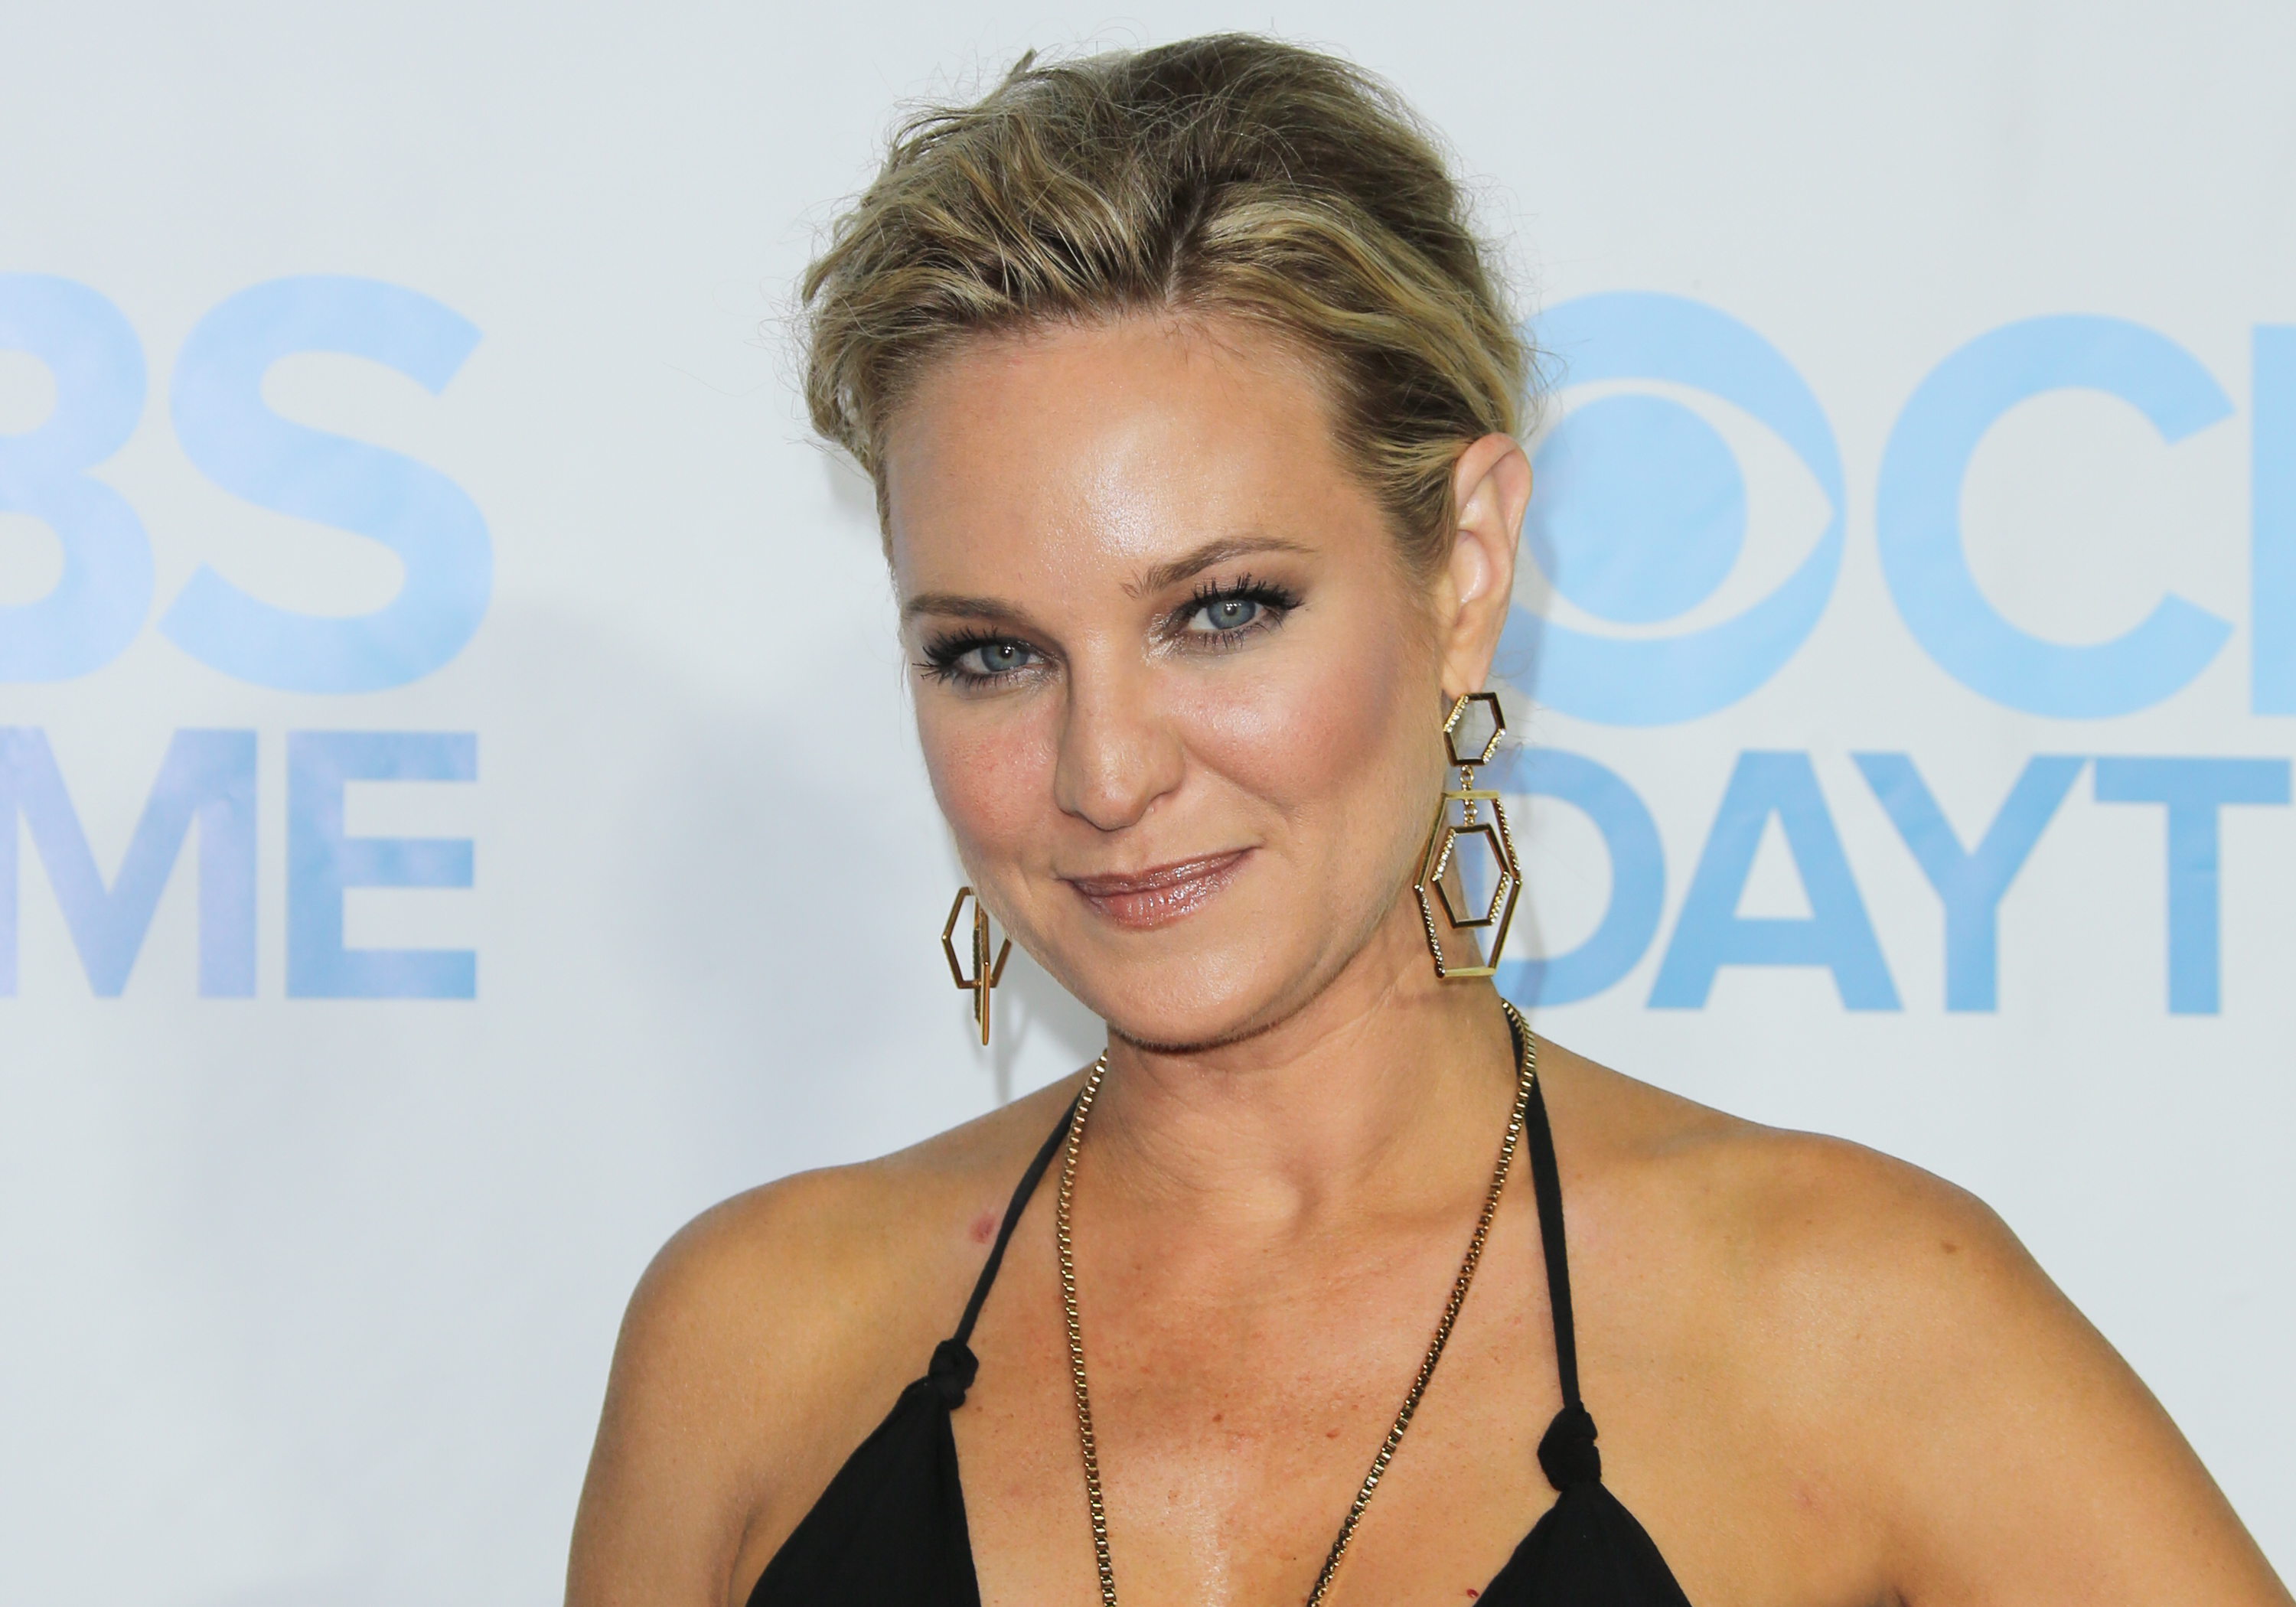 'The Young and the Restless' actor Sharon Case wearing a black dress and sporting an updo hairstyle.